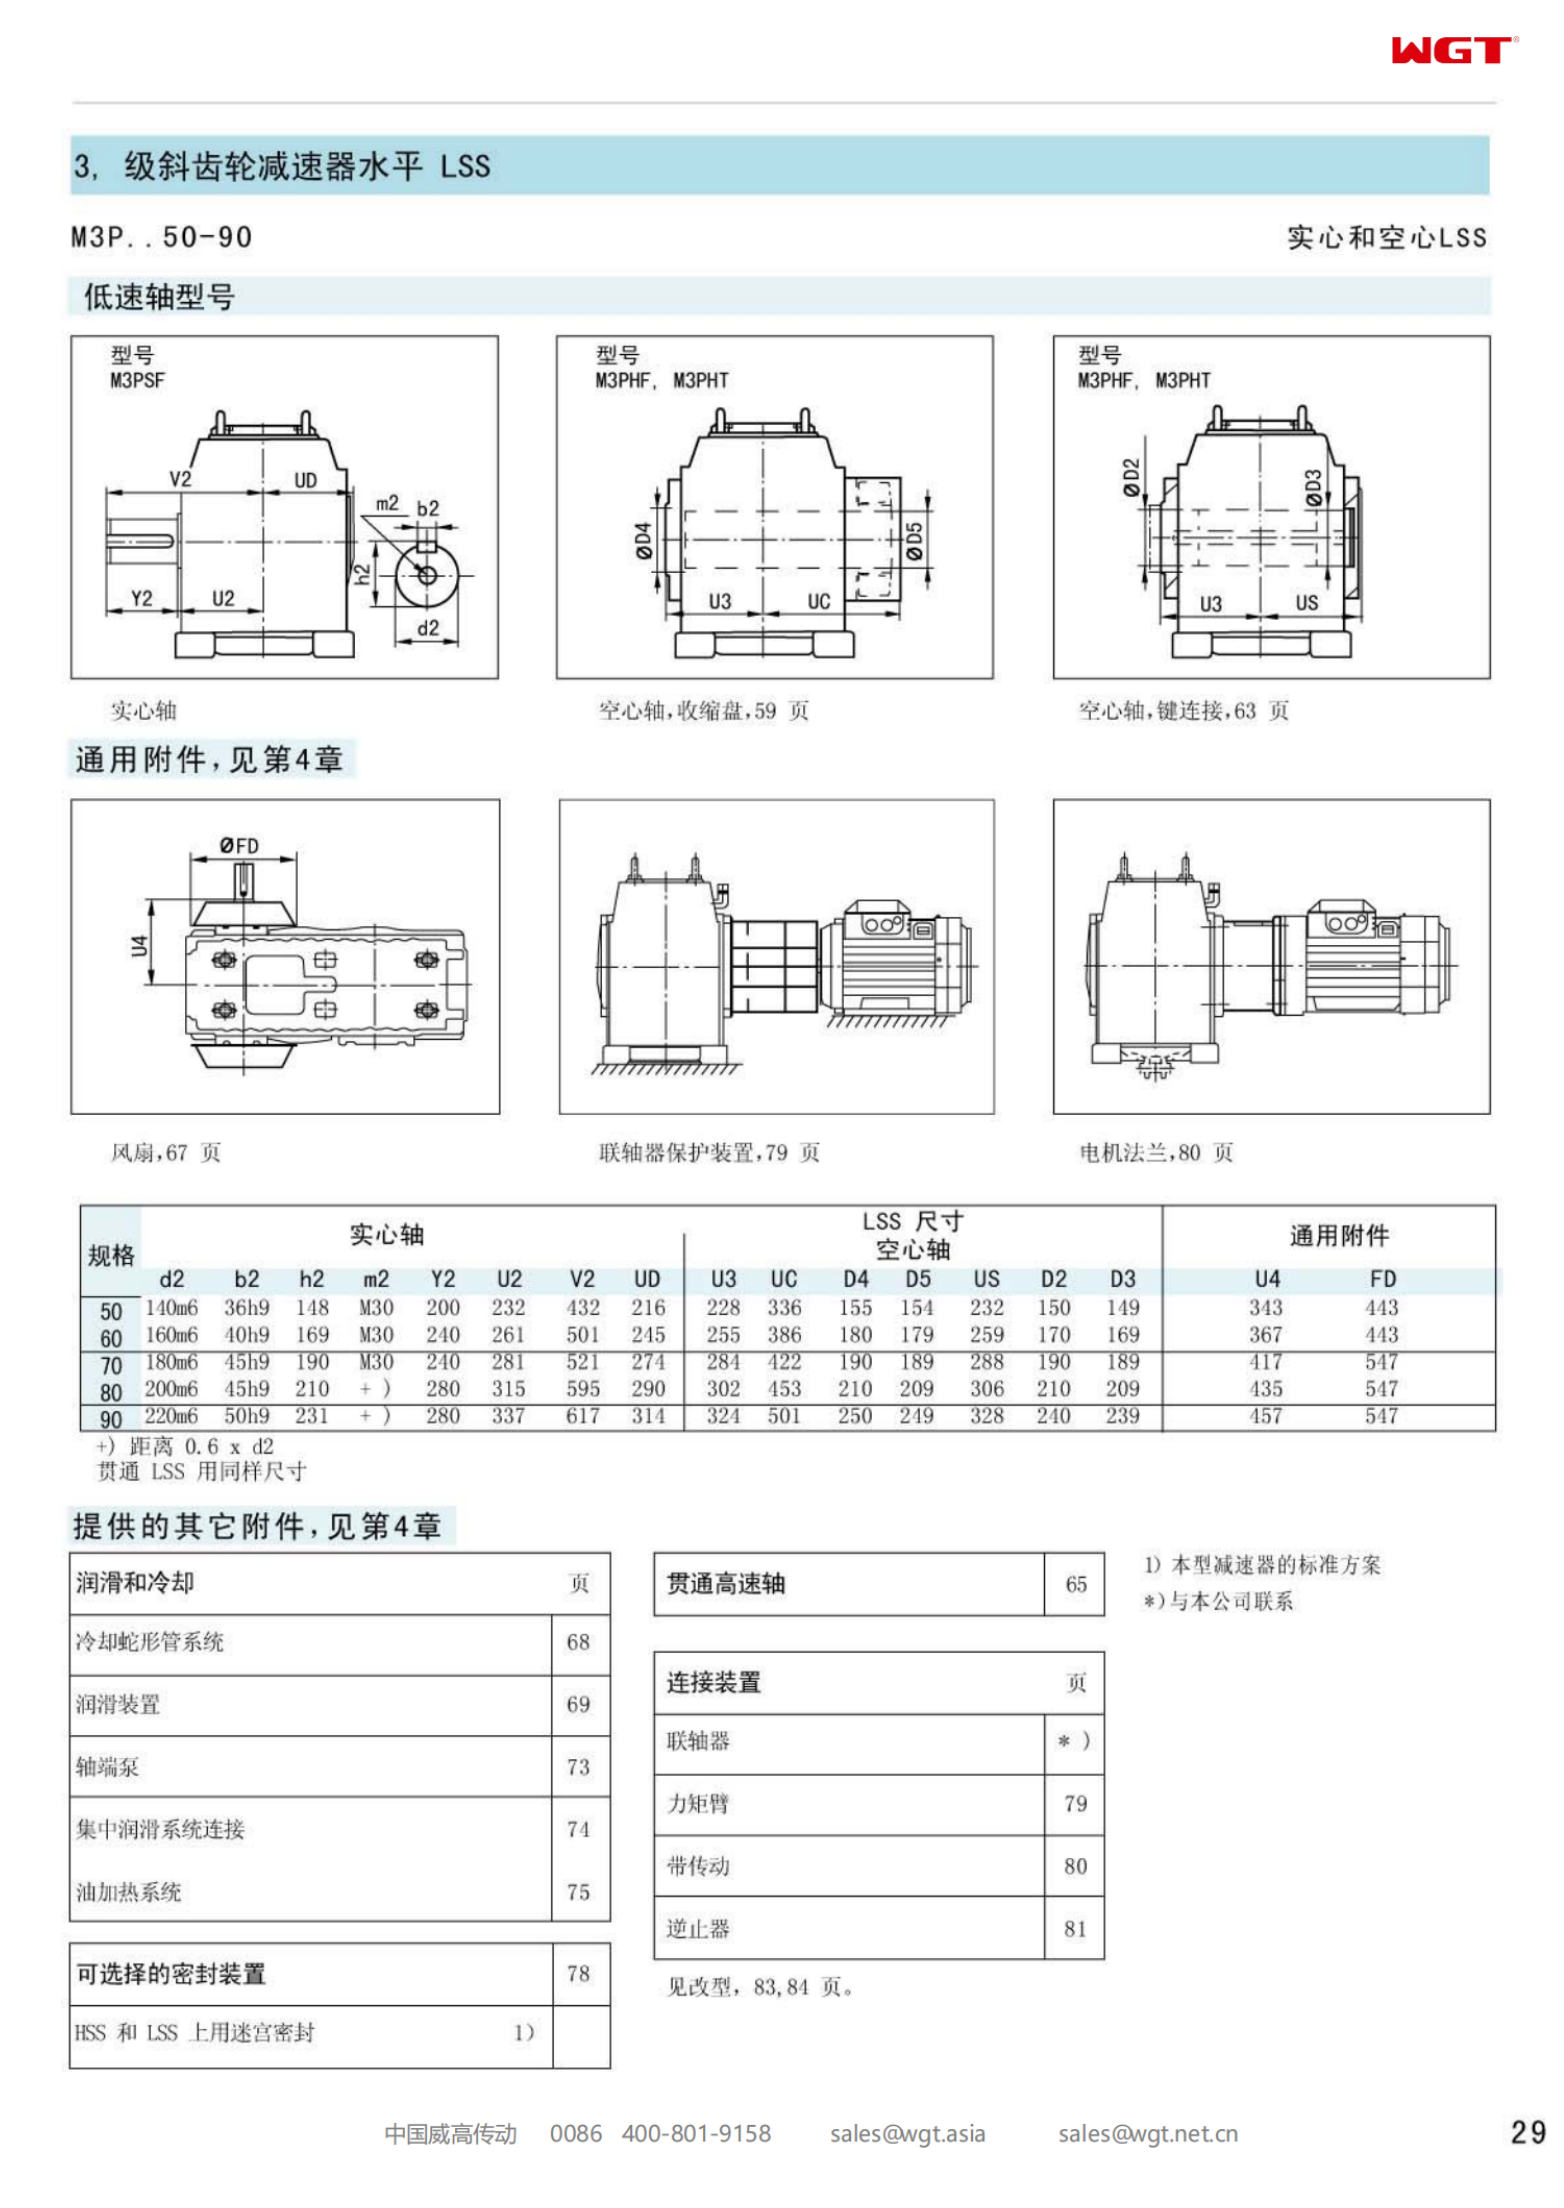 M3PSF60 Replace_SEW_M_Series Gearbox